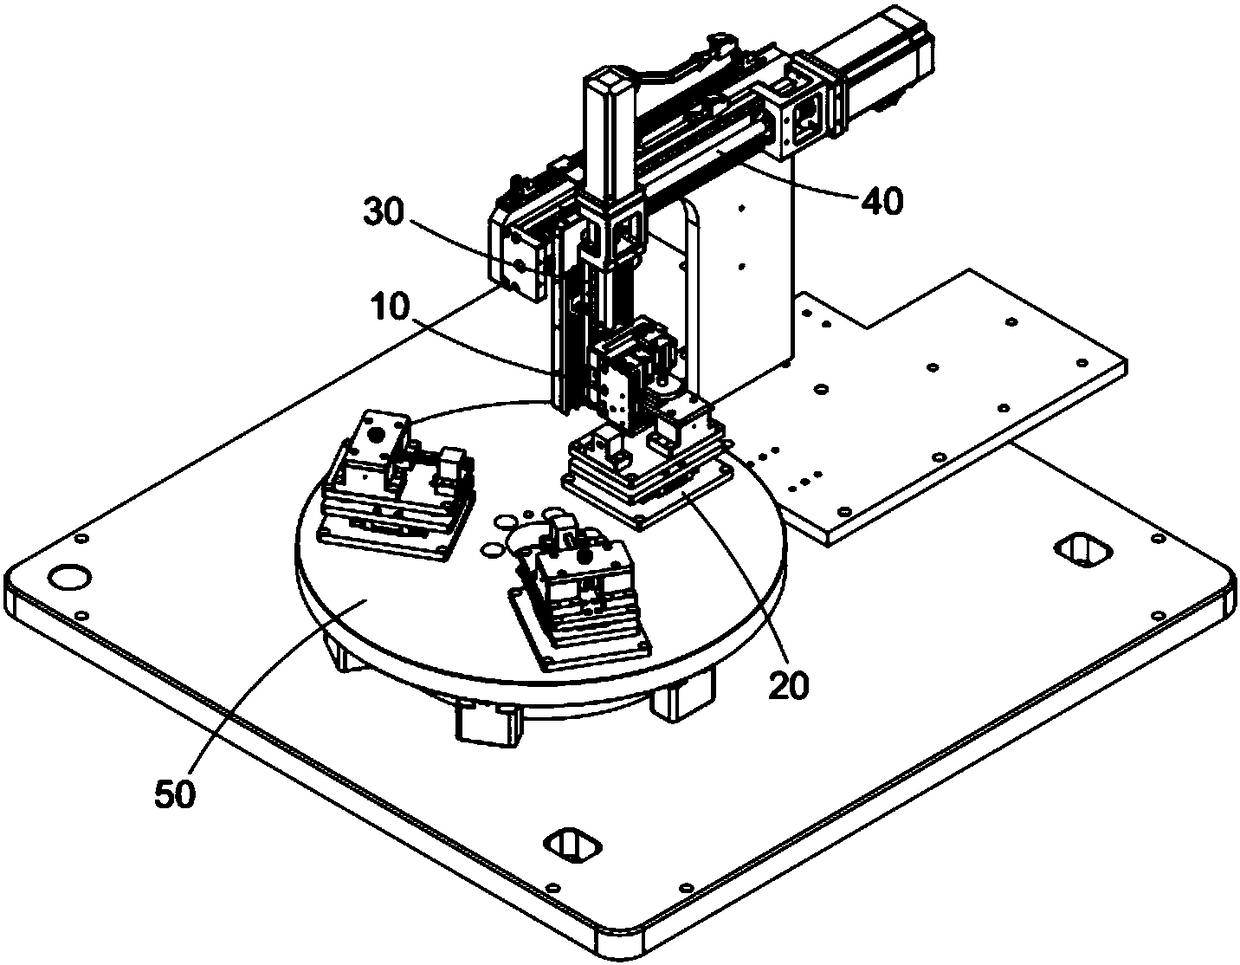 A sealing ring assembly device